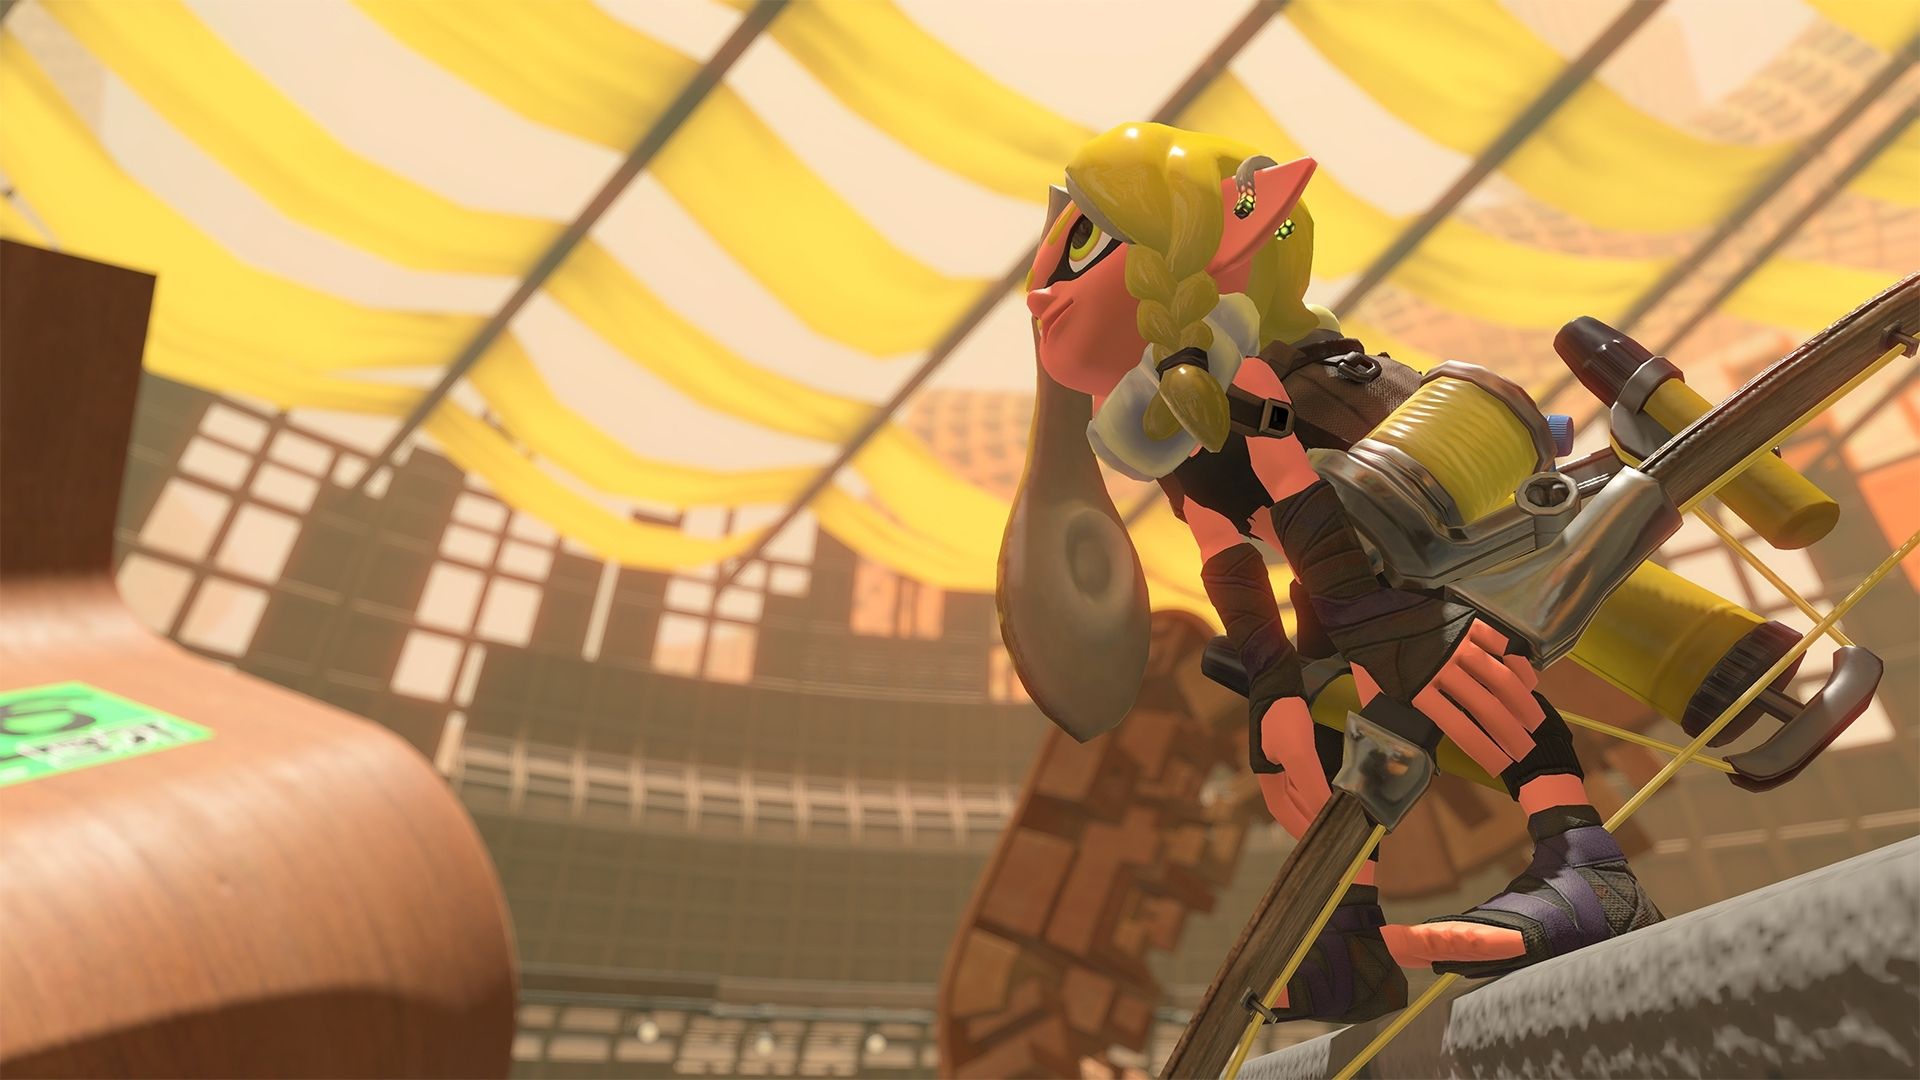 The main character holding a Splatoon 3 weapon, the Sri-Stinger, while looking over a ledge.